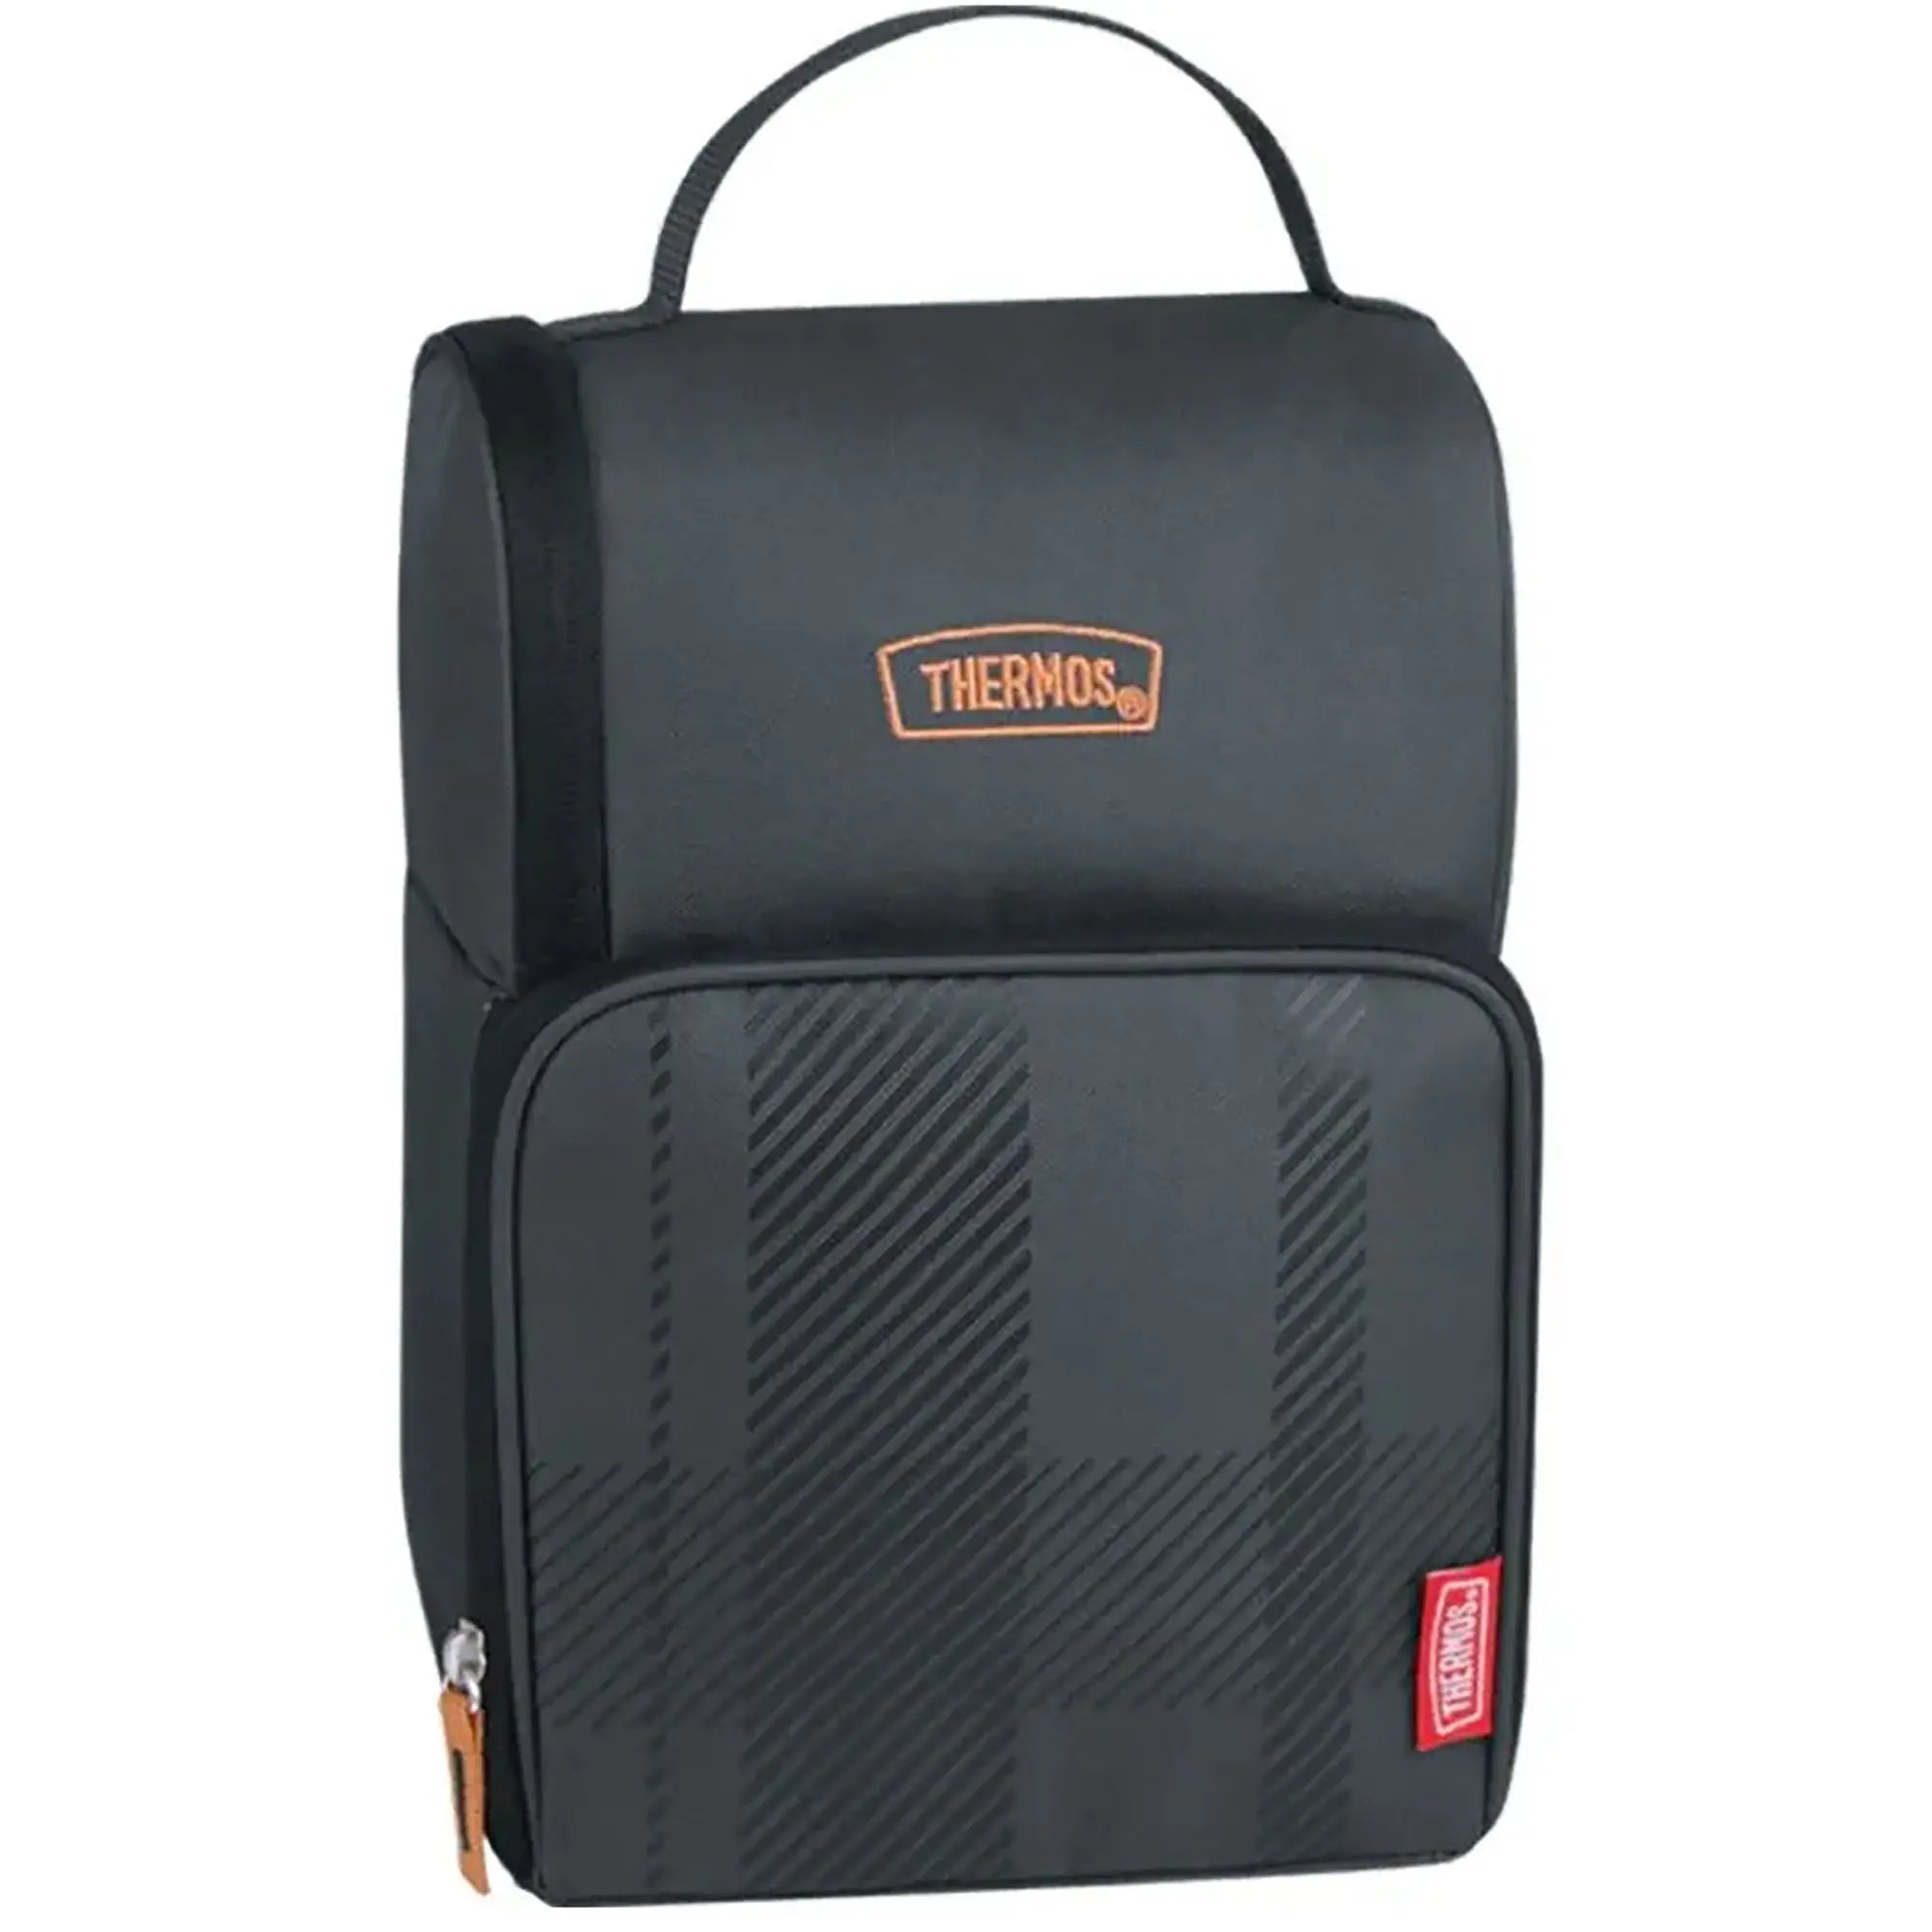 Thermos Dual Compartment Soft Lunch Box - Charcoal Plaid Thermos